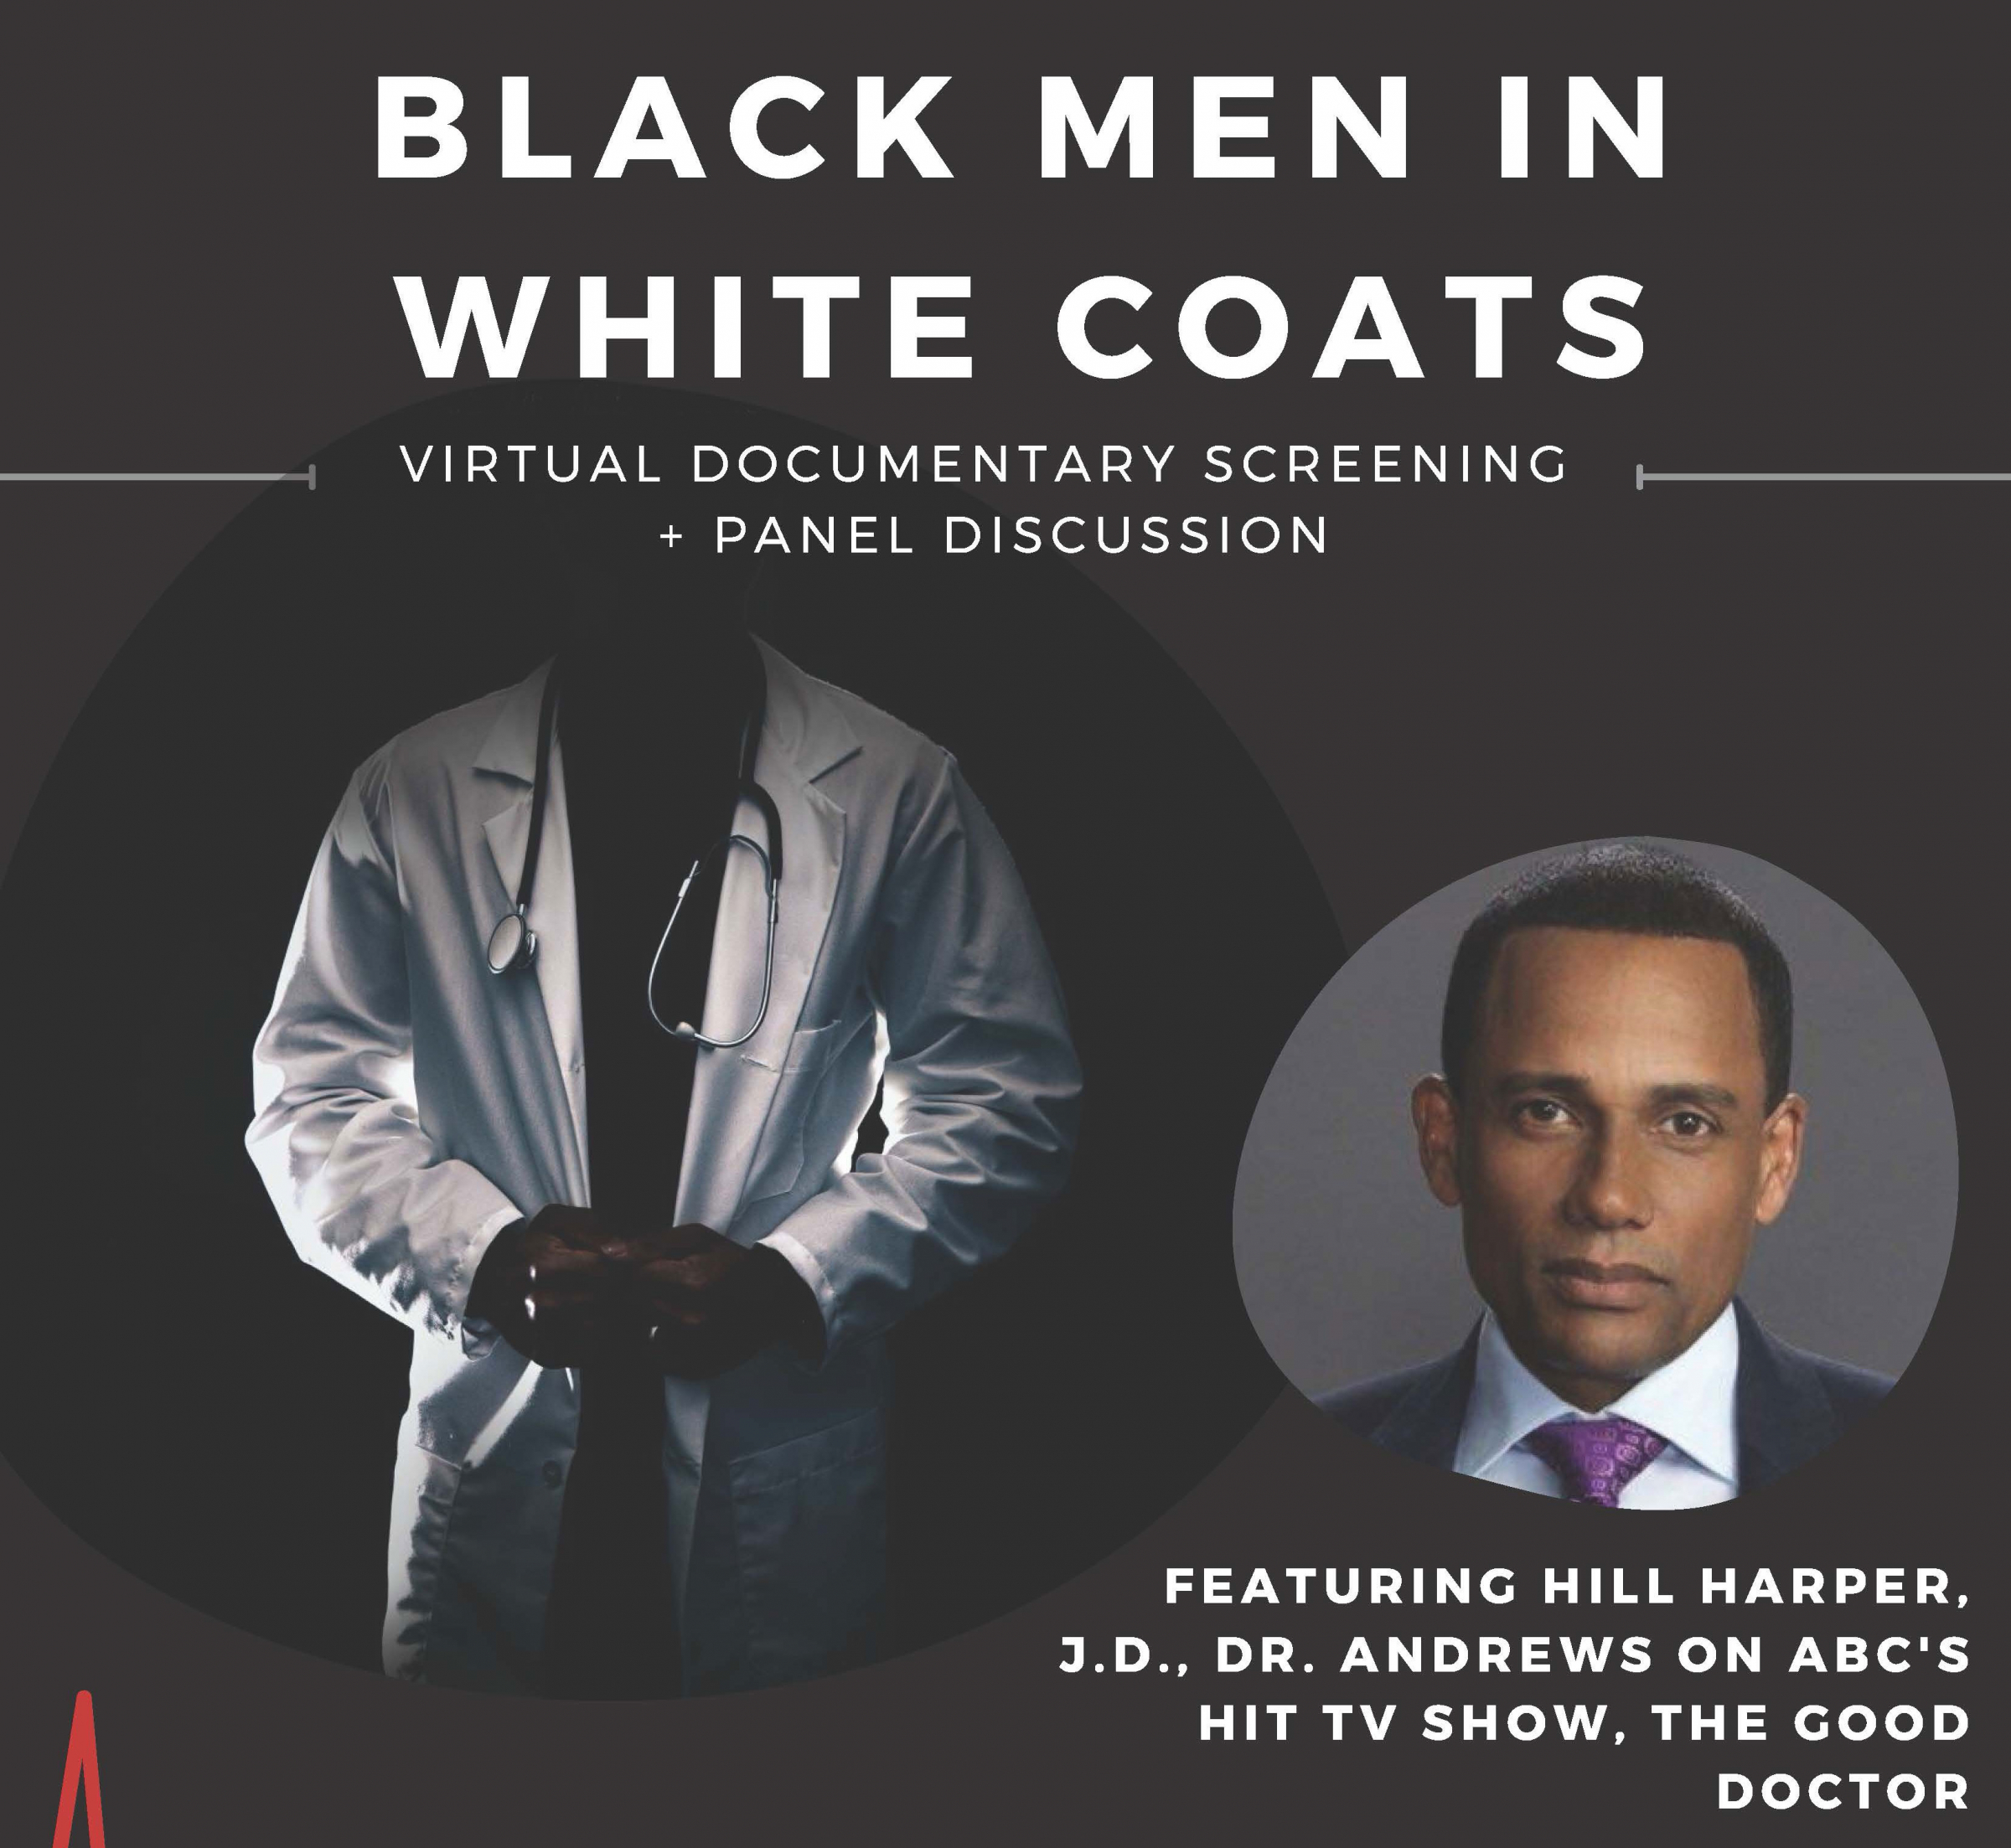 Poster for the documentary "Black Men in White Coats". Virtual documentary screening + panel discussion. Featuring Hill Harper, J.D., Dr. Andres on ABC's hit tv show, 'The Good Doctor.' Circular inset picture of Hill Harper. Larger circular image of a black man is a white coat.